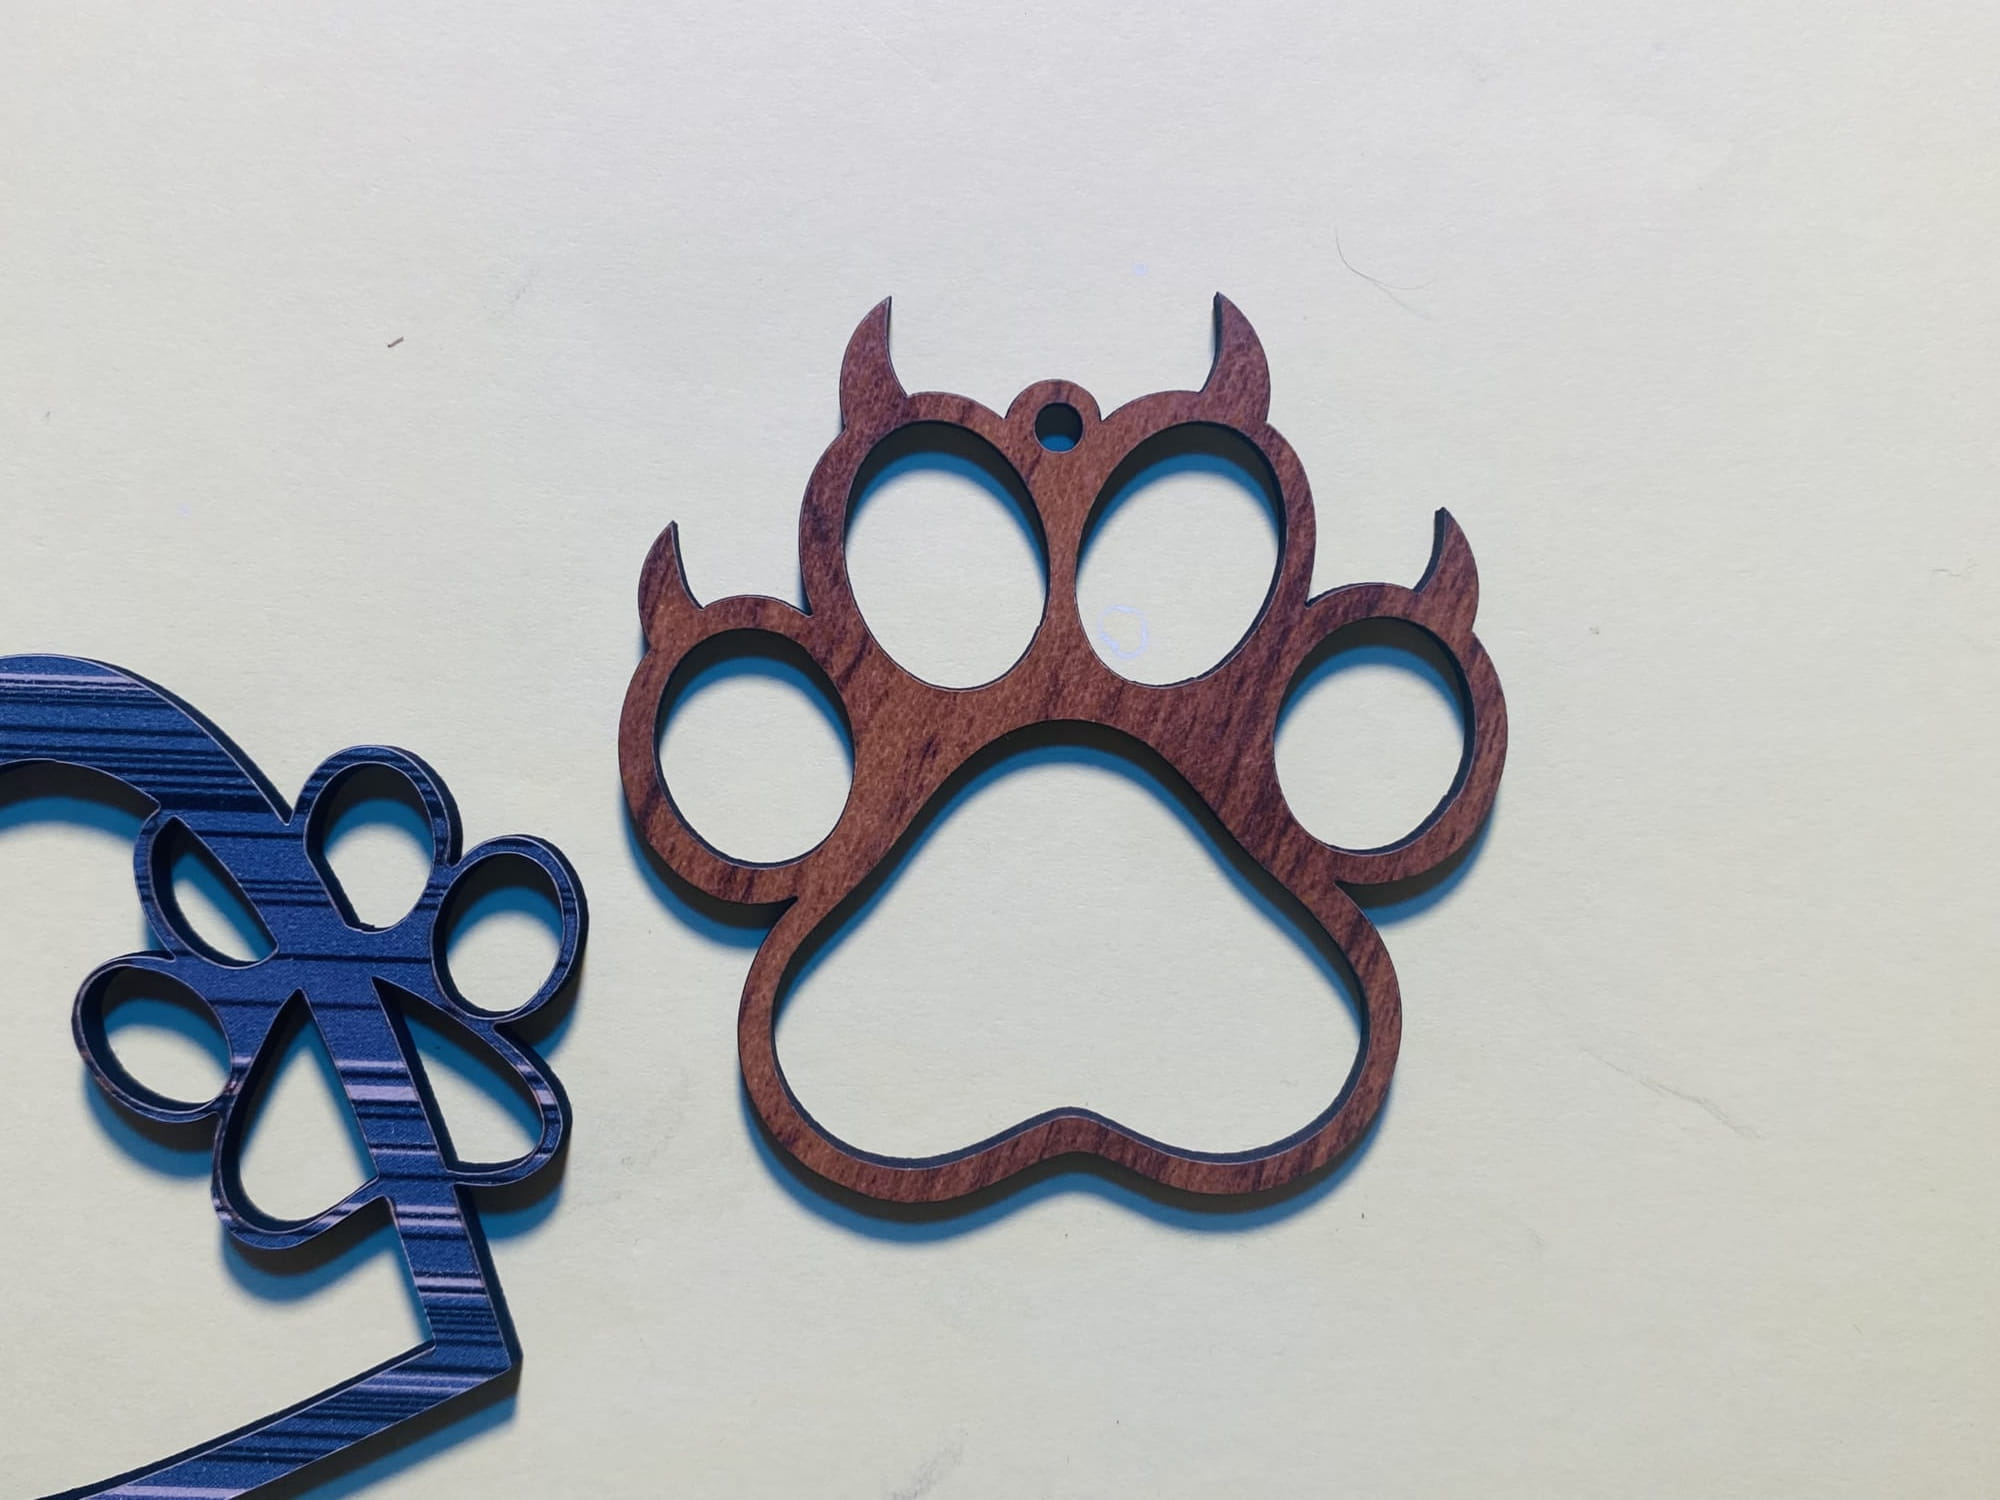 Laser Cut Wooden Paw Print Ornament Free Vector